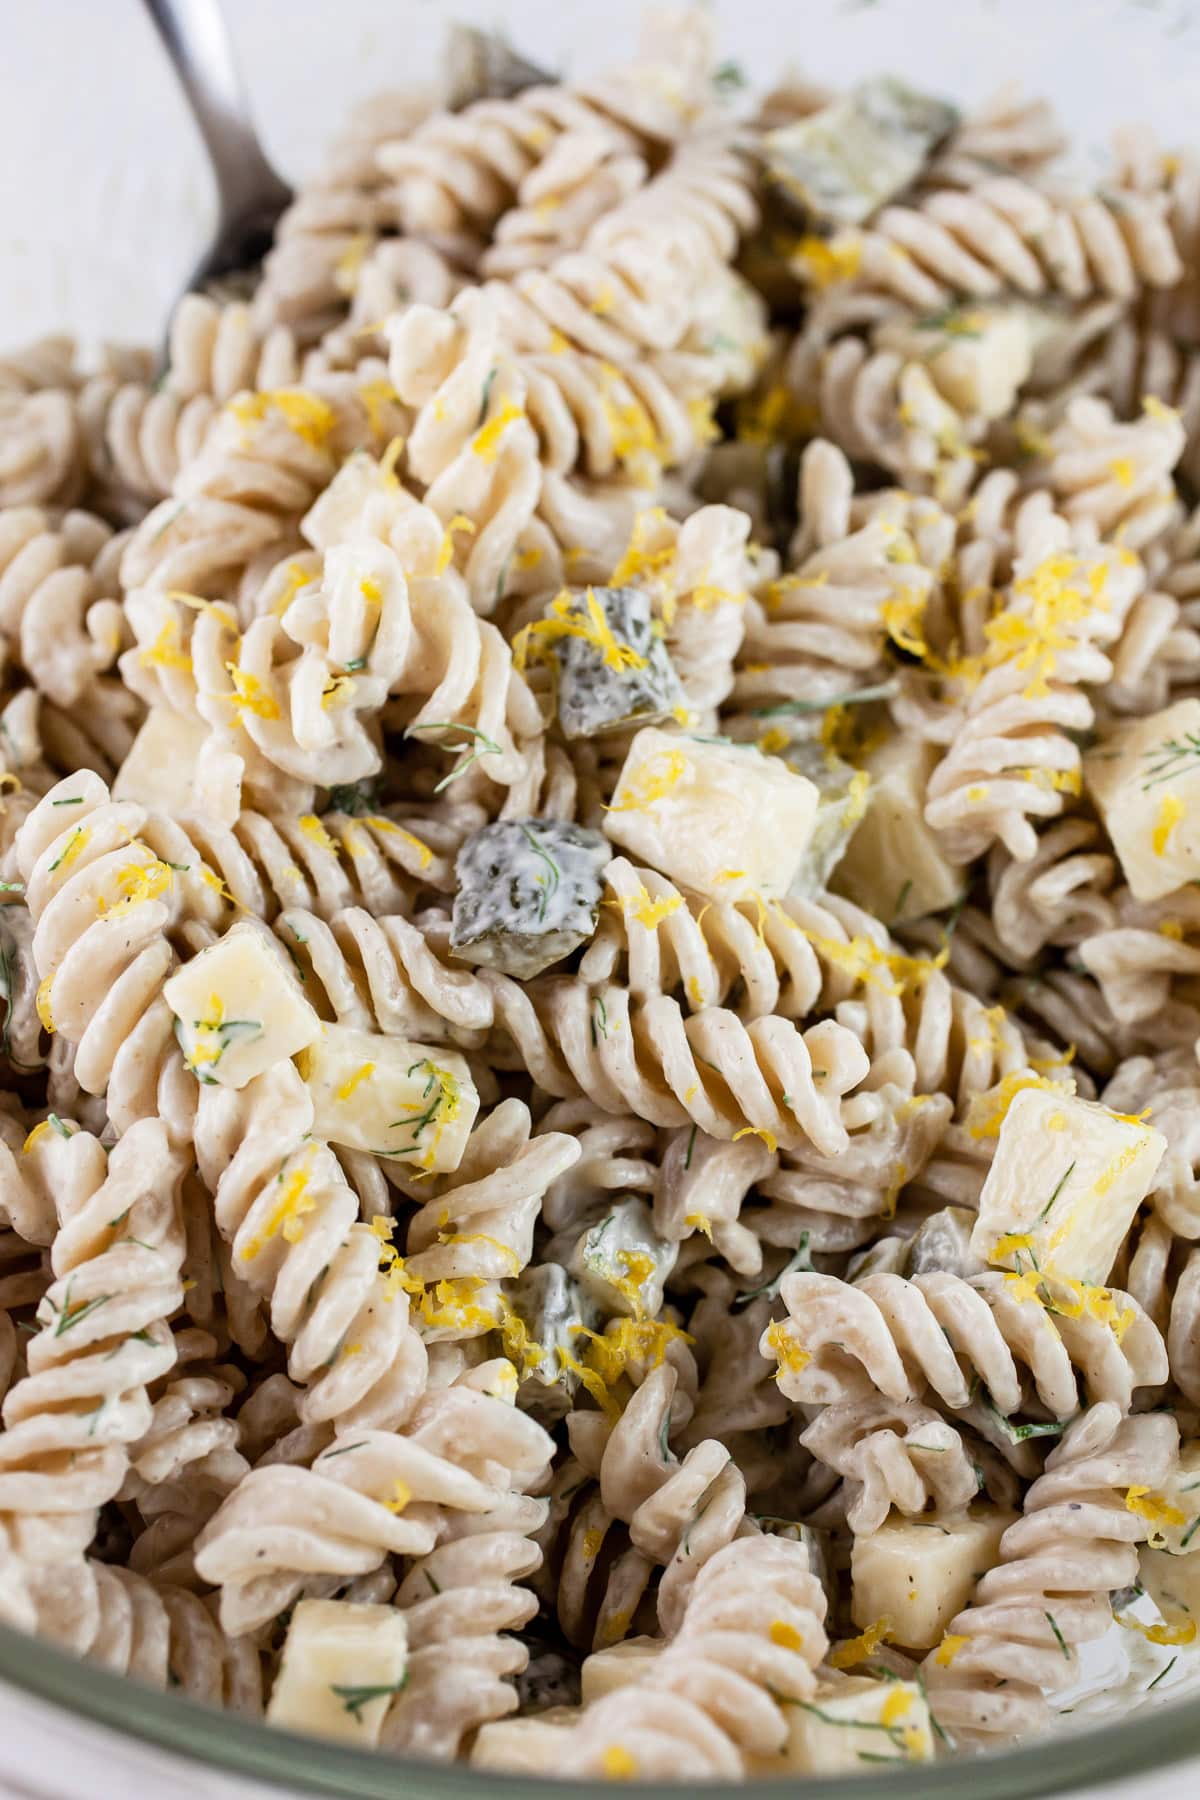 Dill pickle pasta salad with lemon zest in glass mixing bowl.